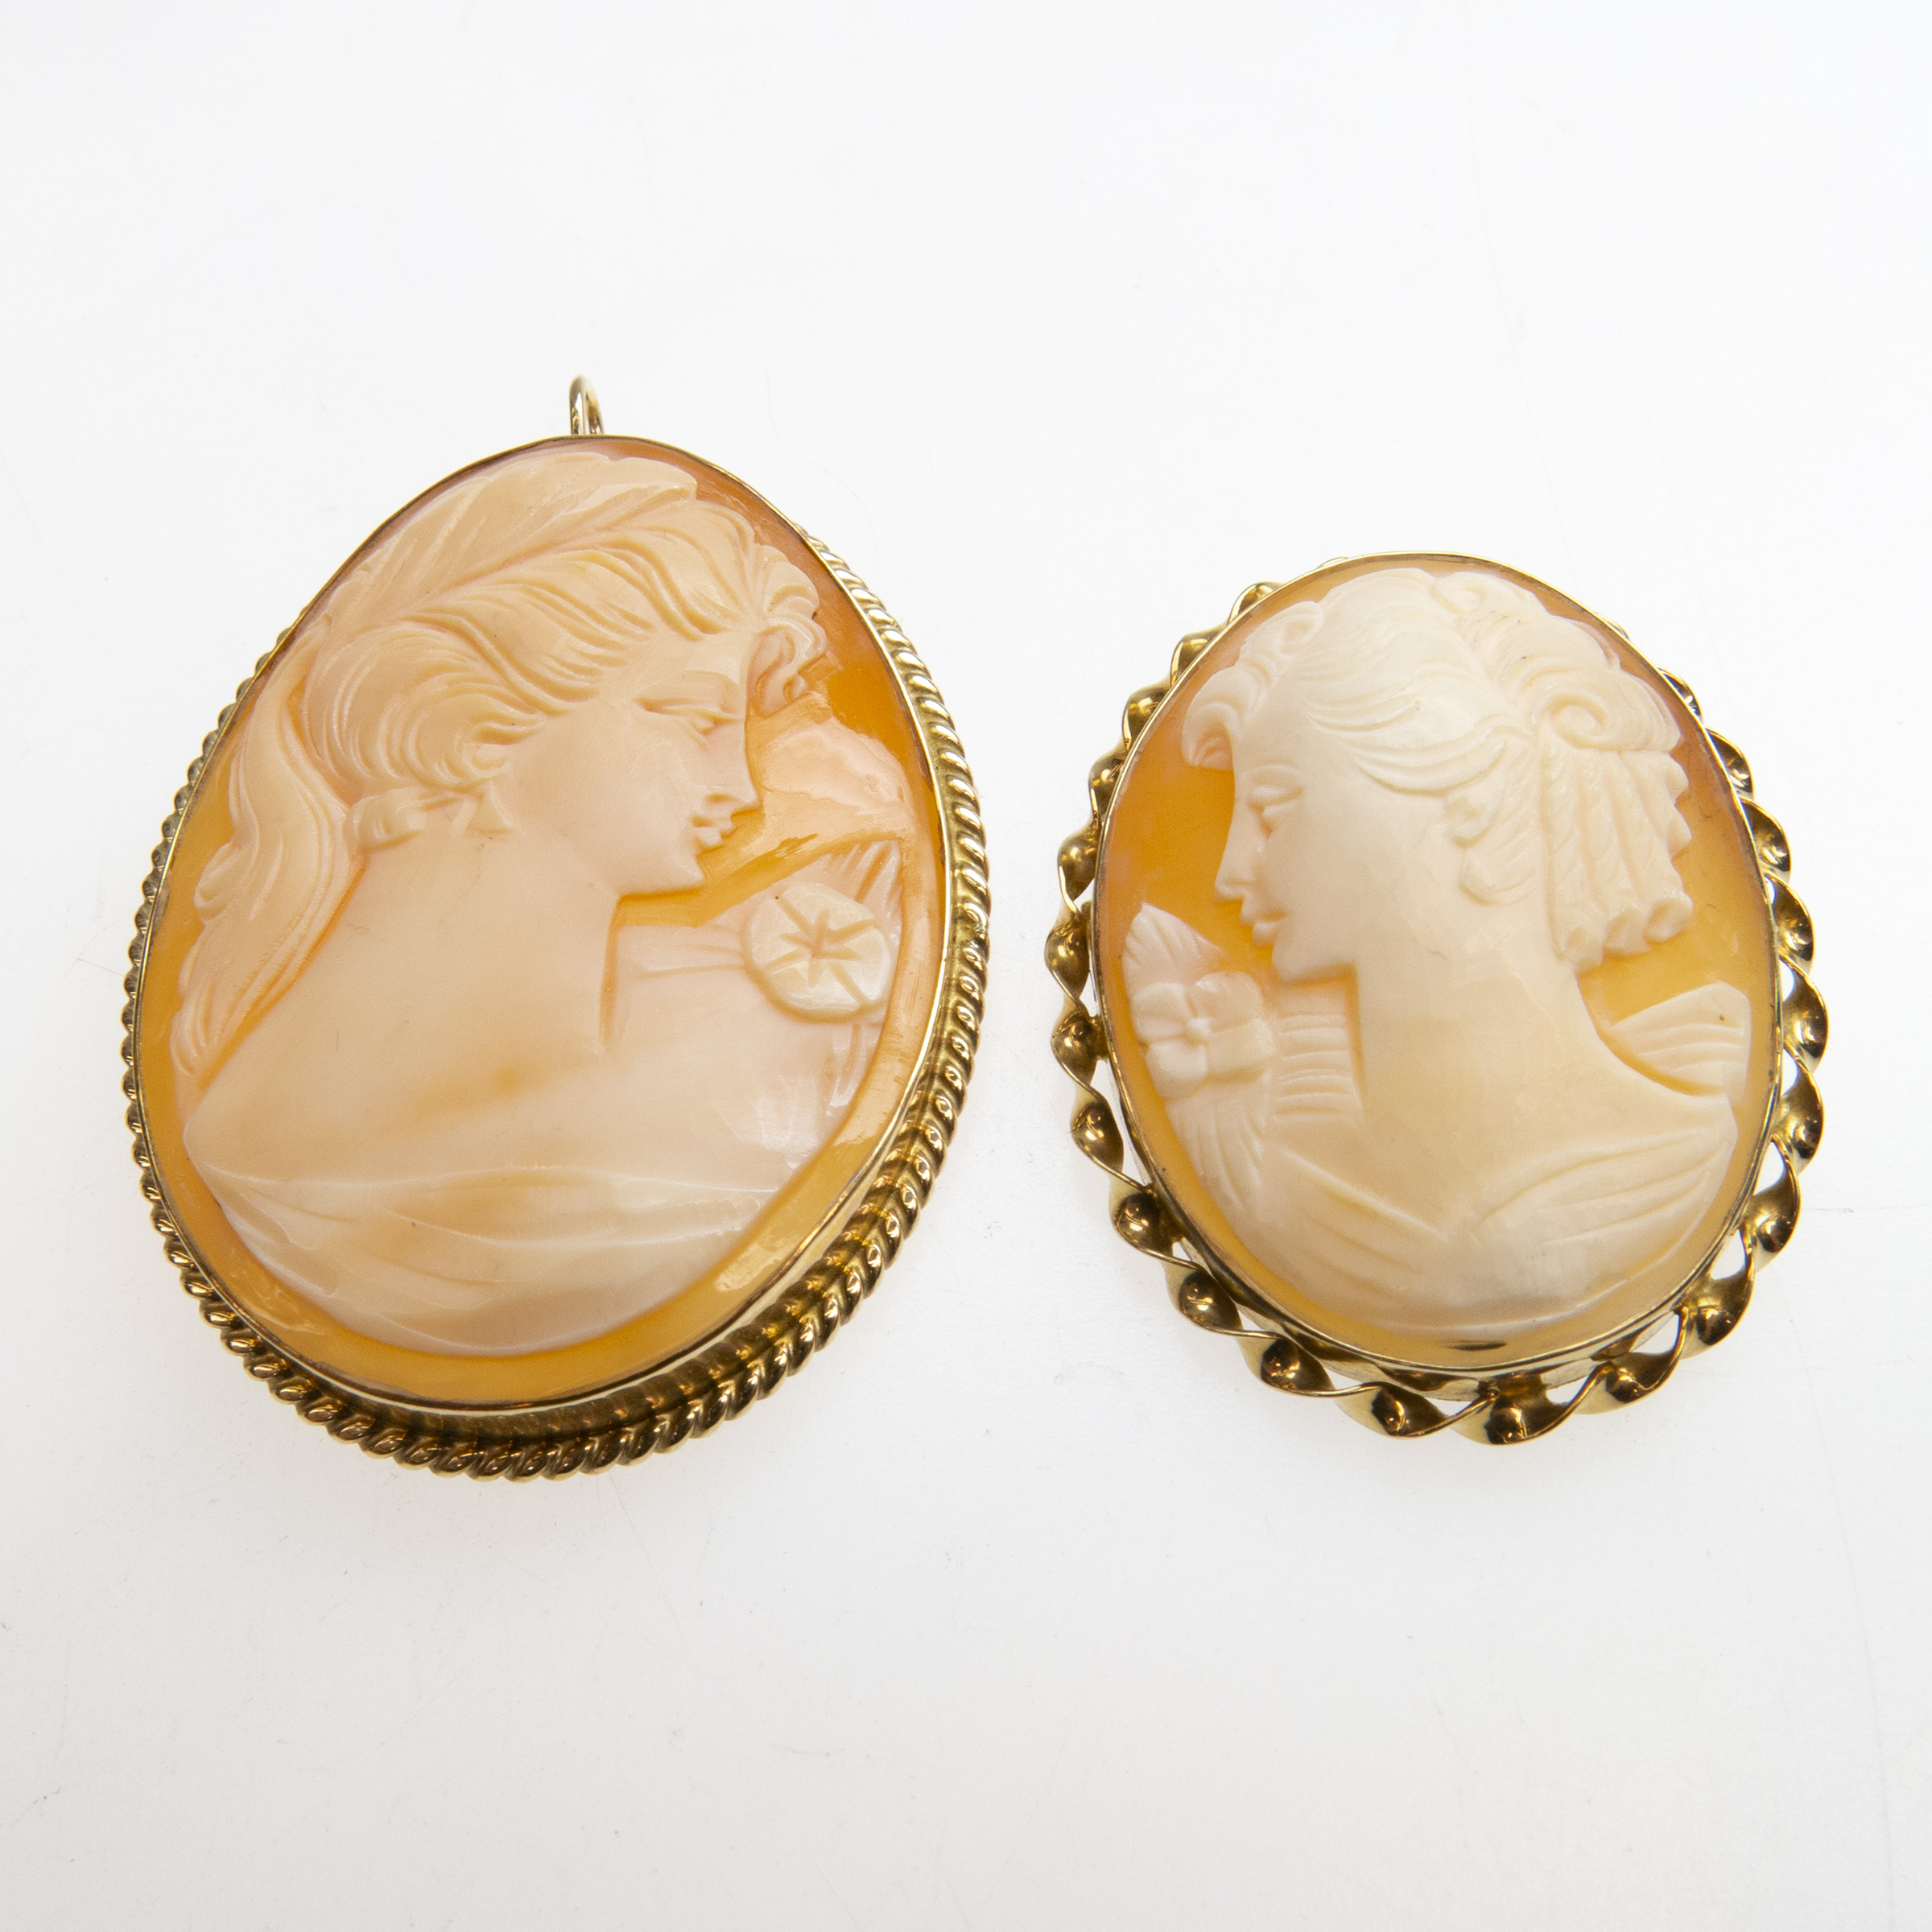 Two Oval Carved Shell Cameos